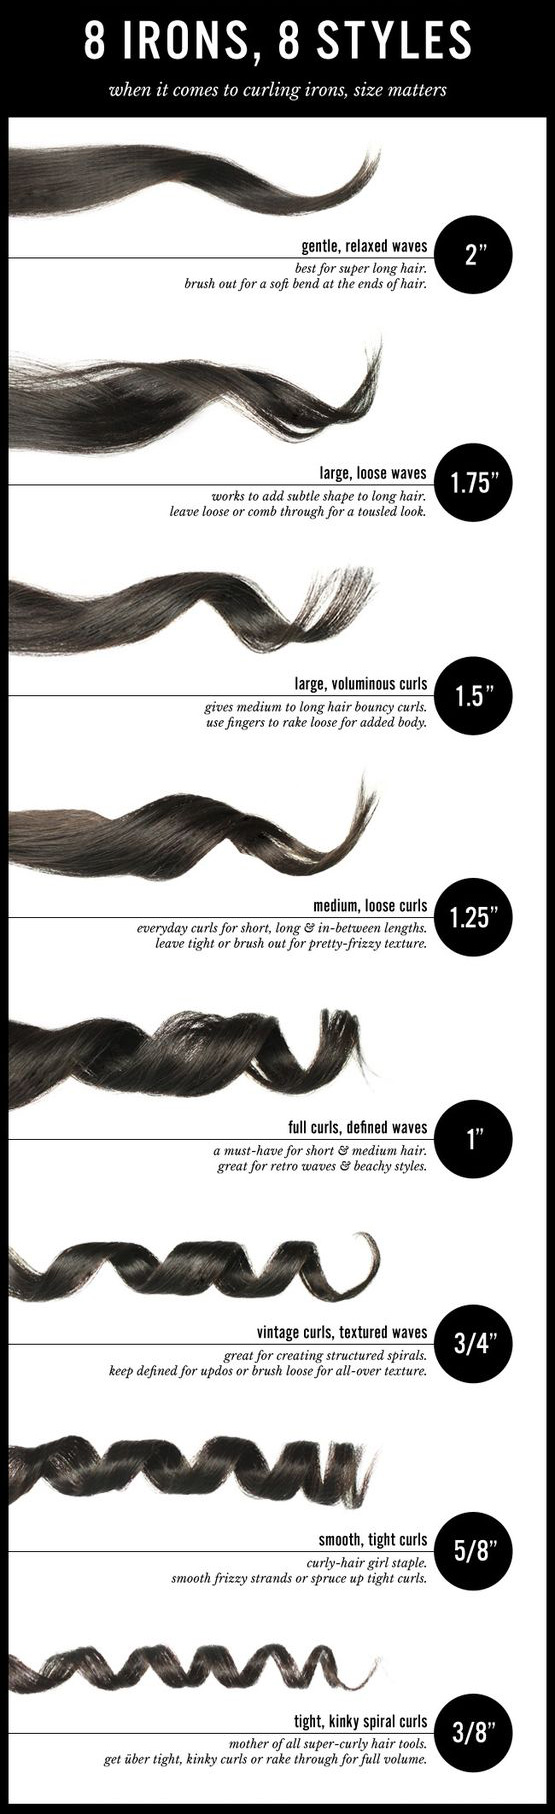 Tools Curling Iron Size Chart